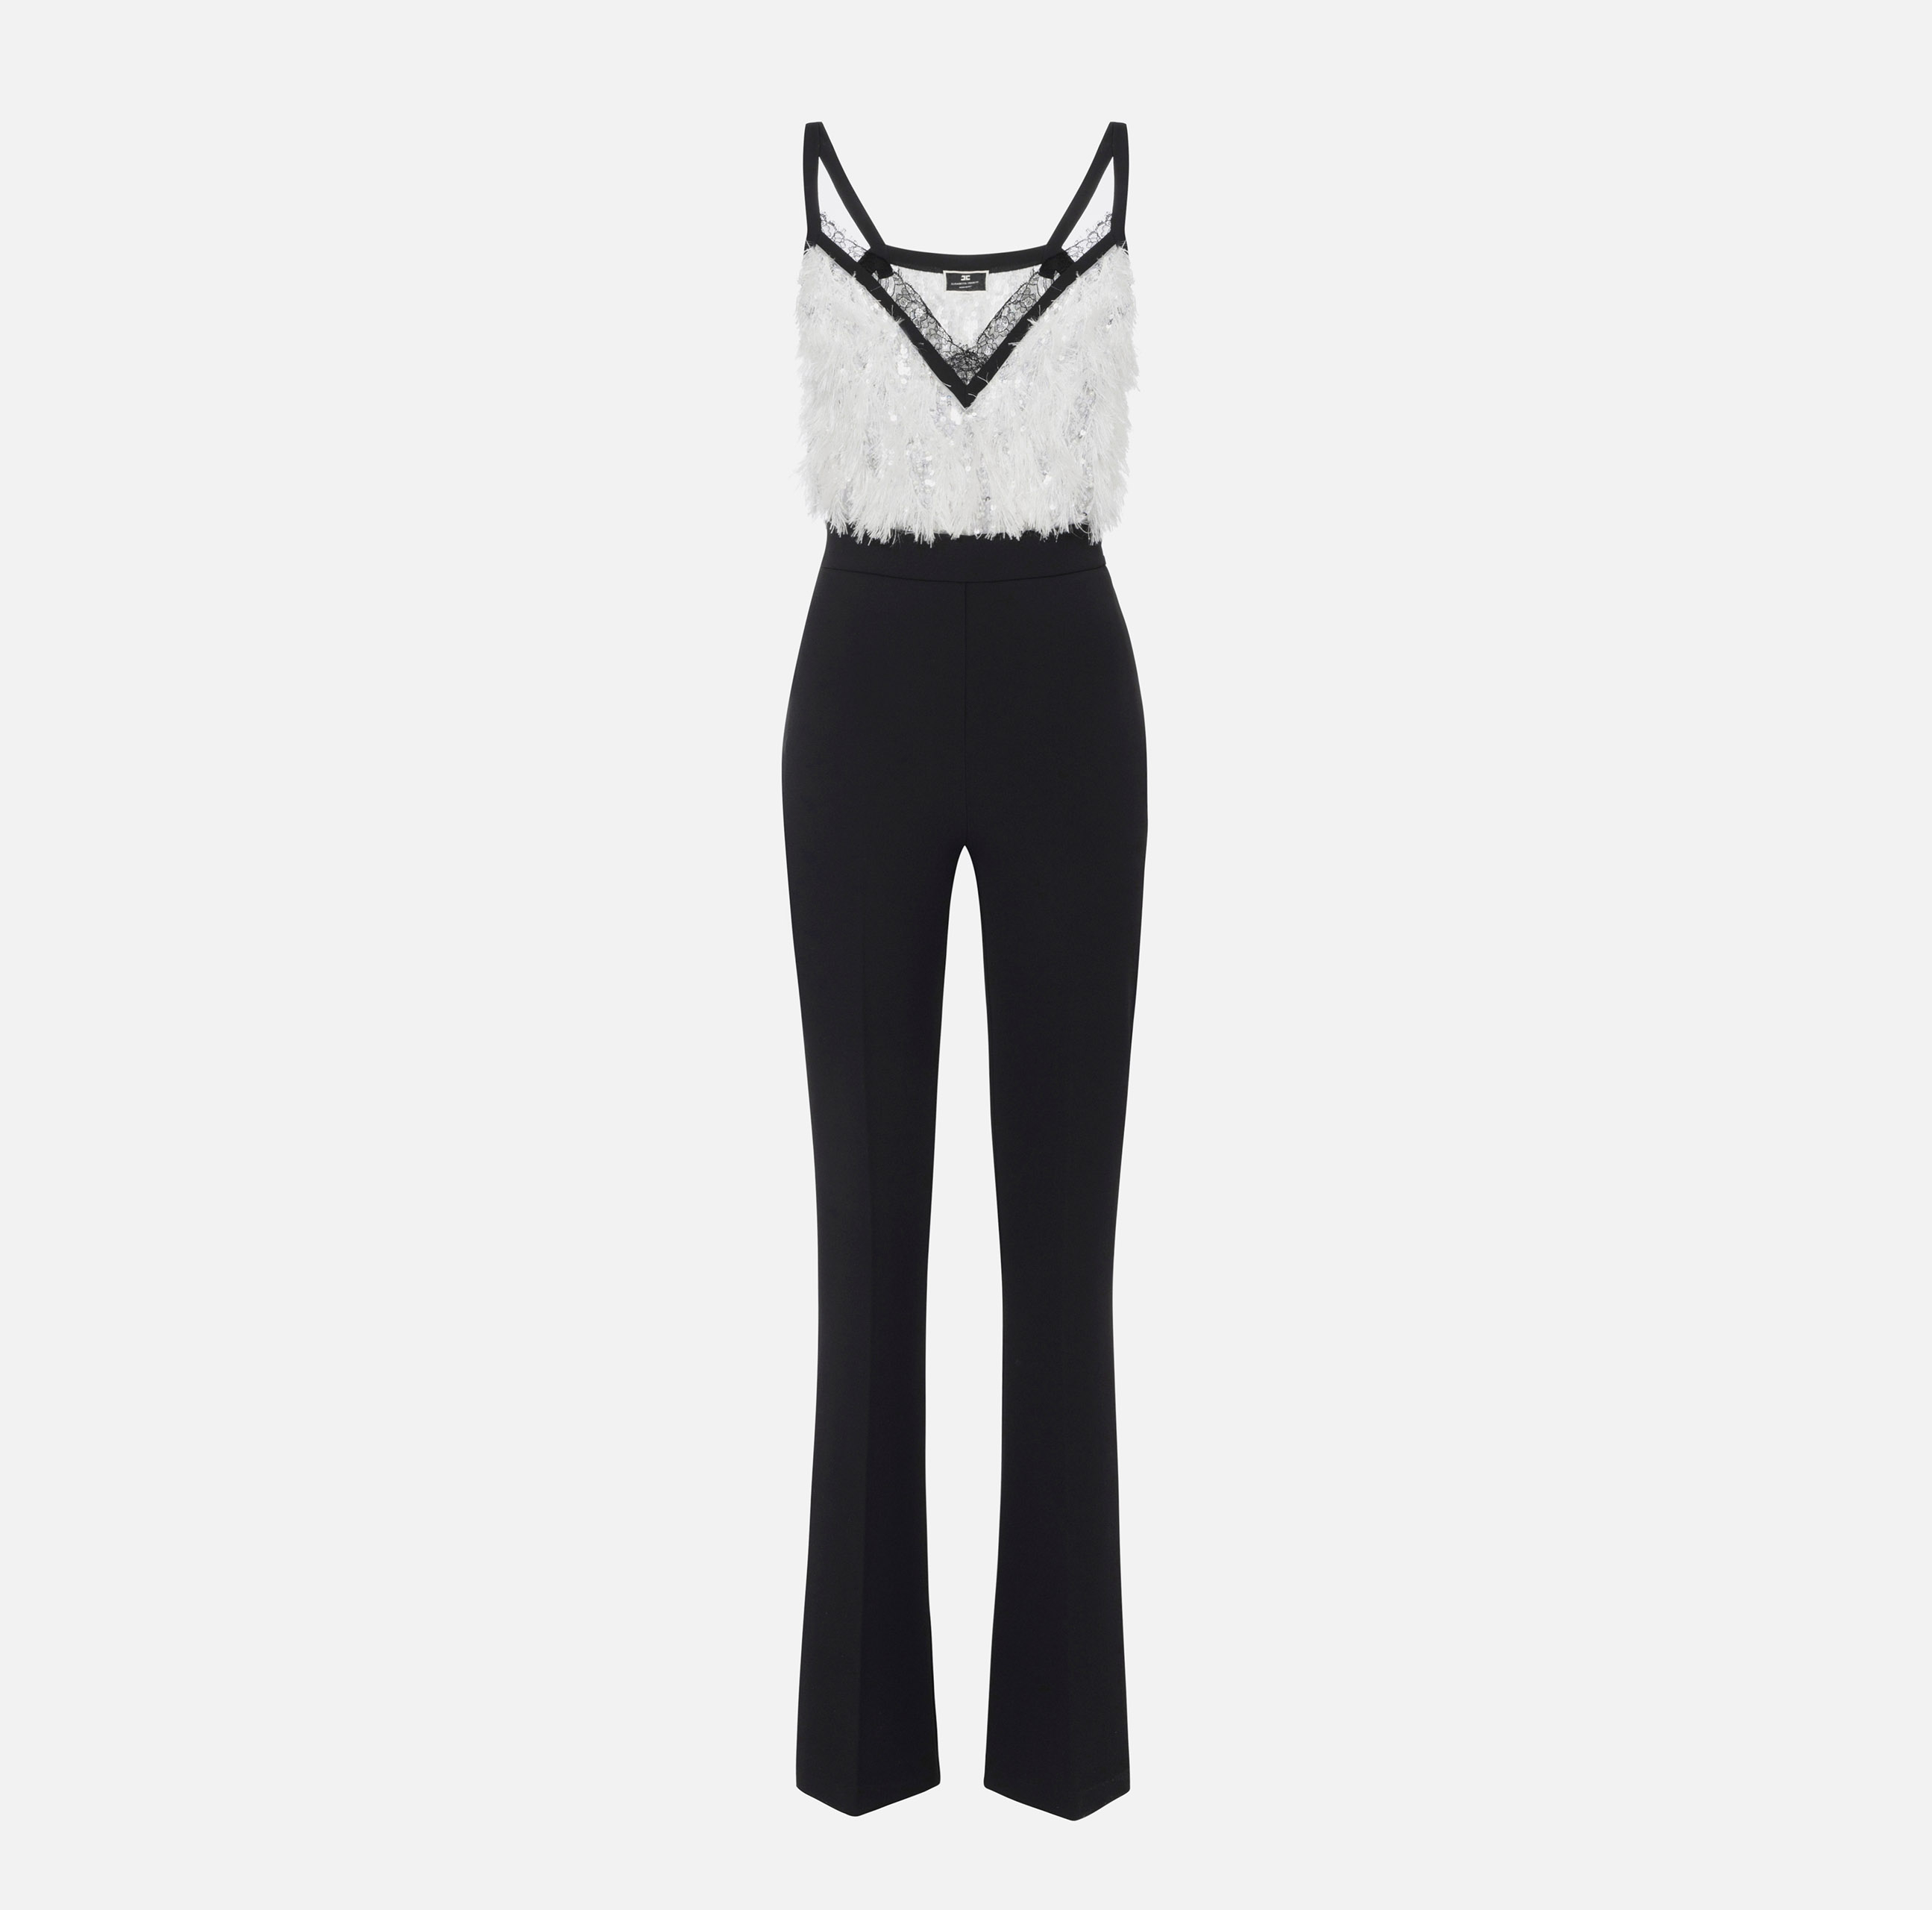 Jumpsuit in crêpe fabric with embroidered top - ABBIGLIAMENTO - Elisabetta Franchi